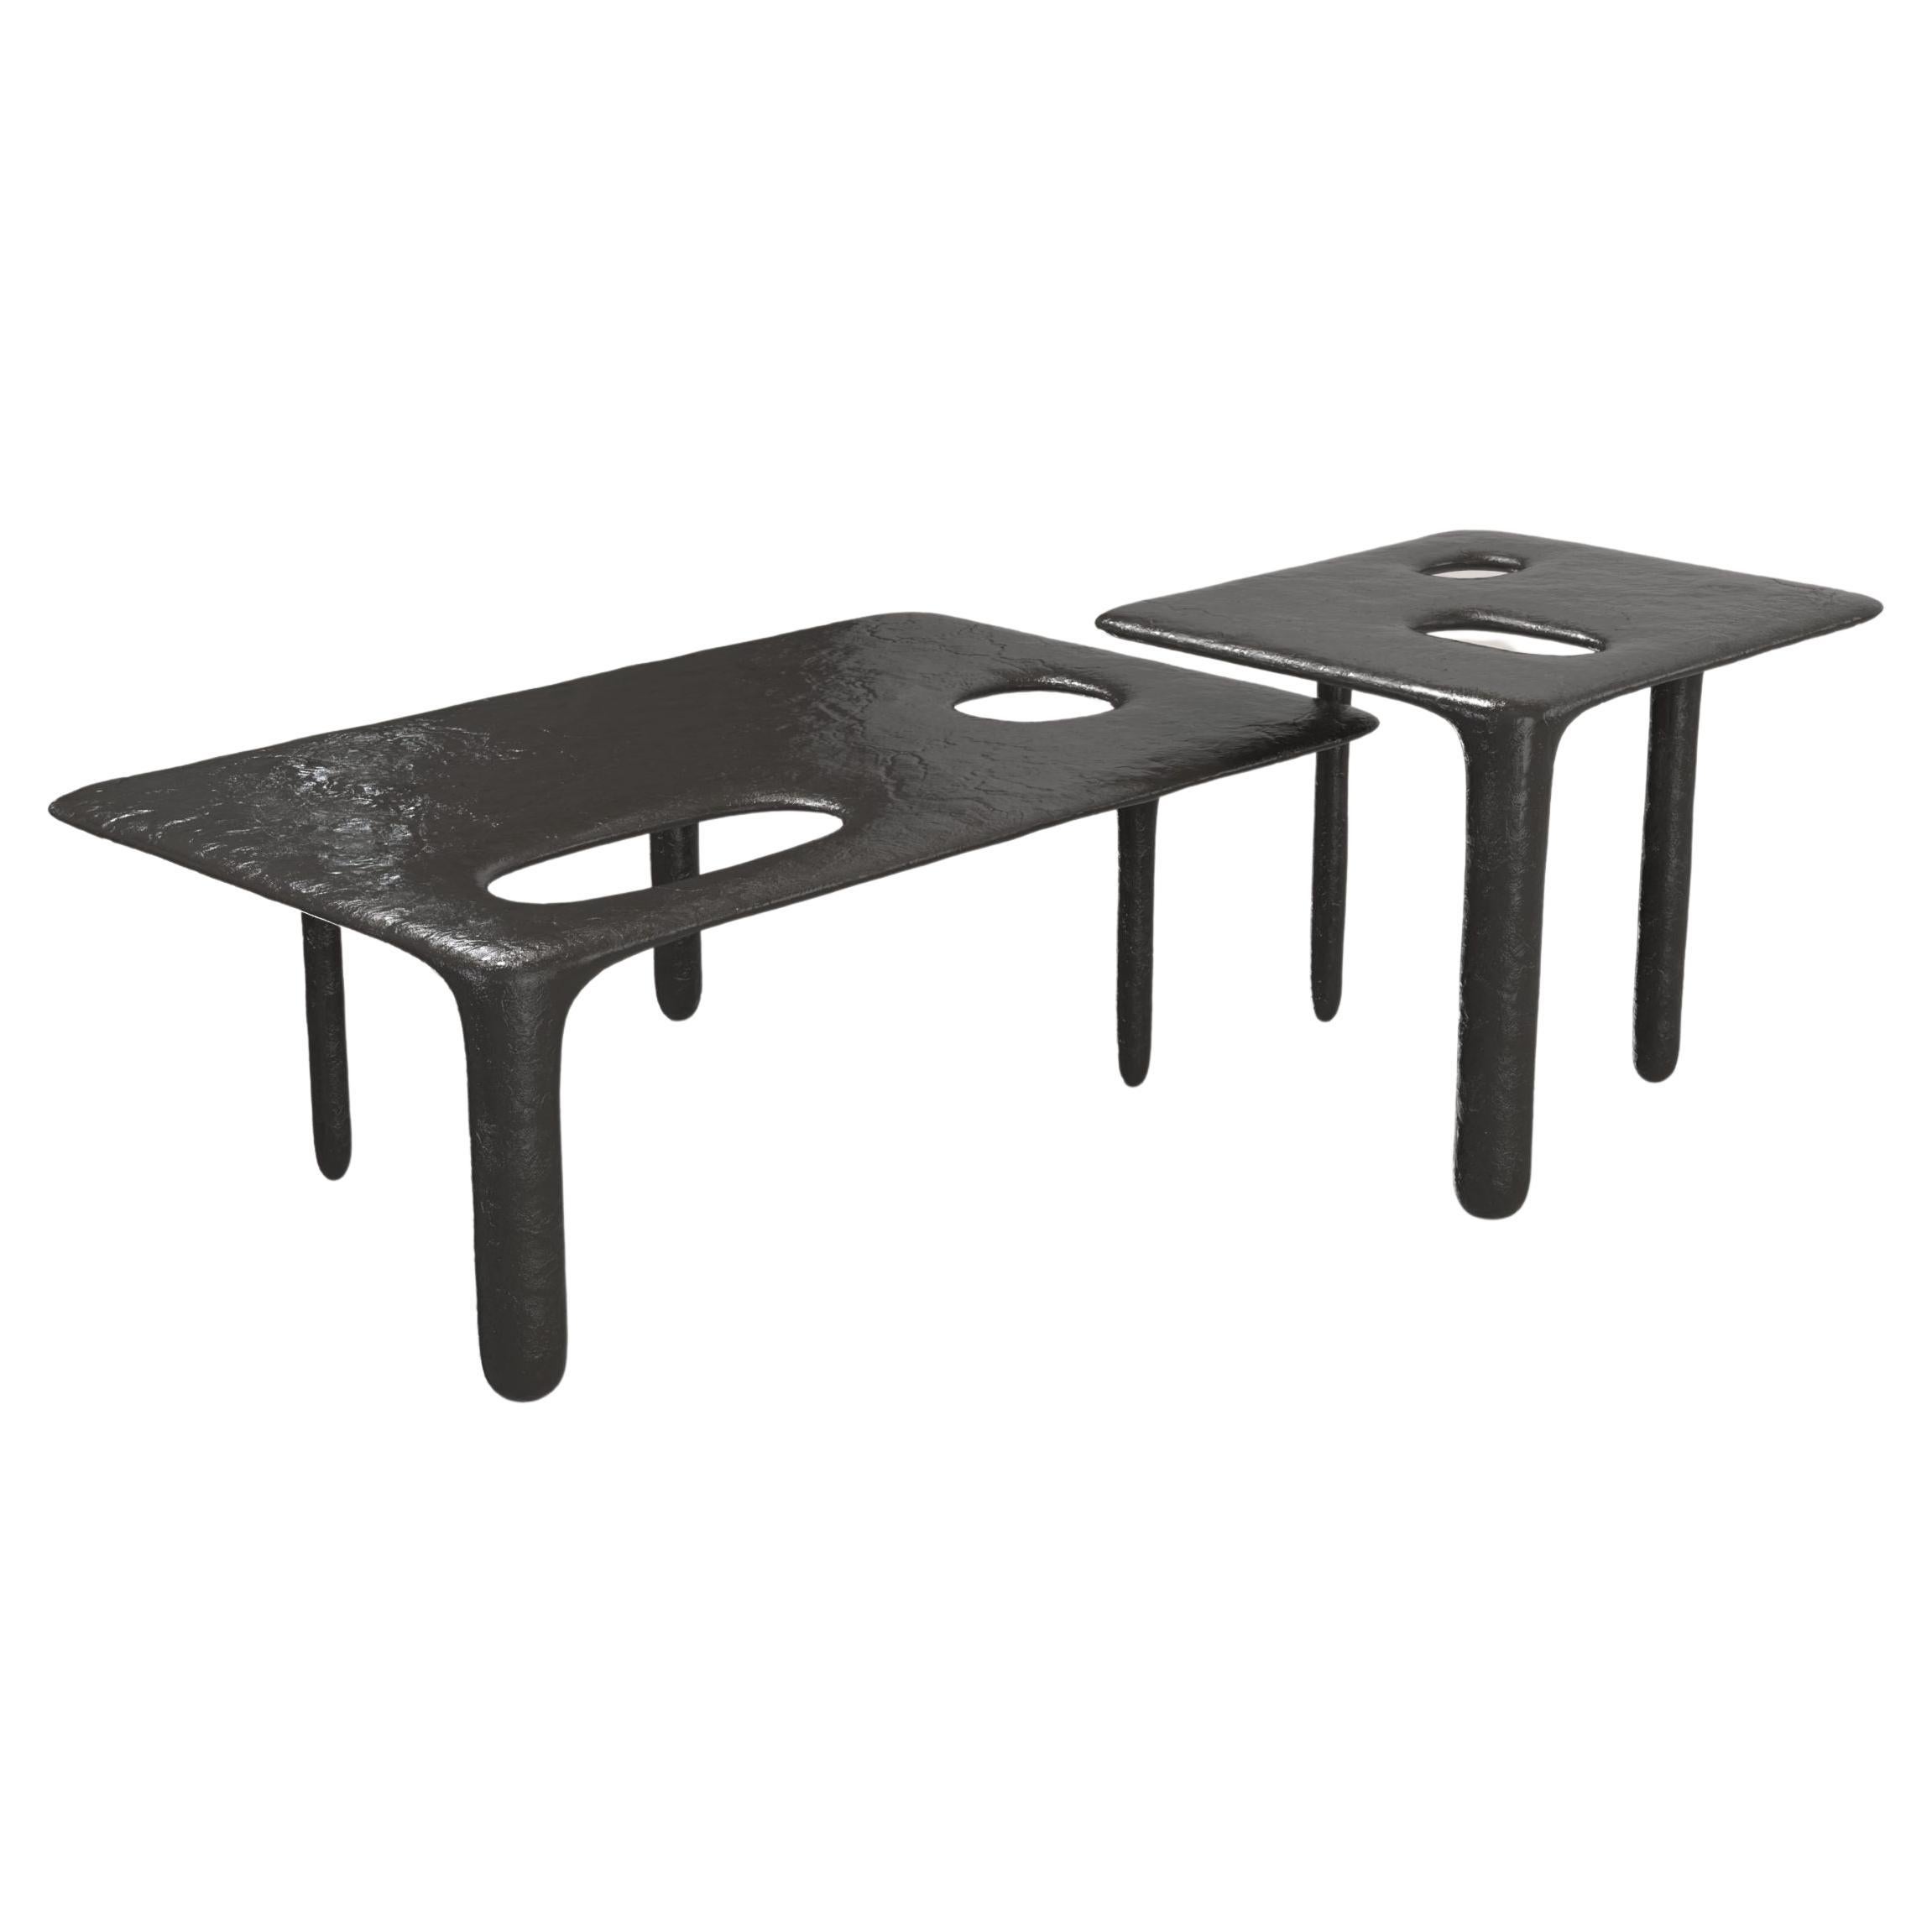 Set of 2 Oasi V1 and V2 Low Tables by Edizione Limitata